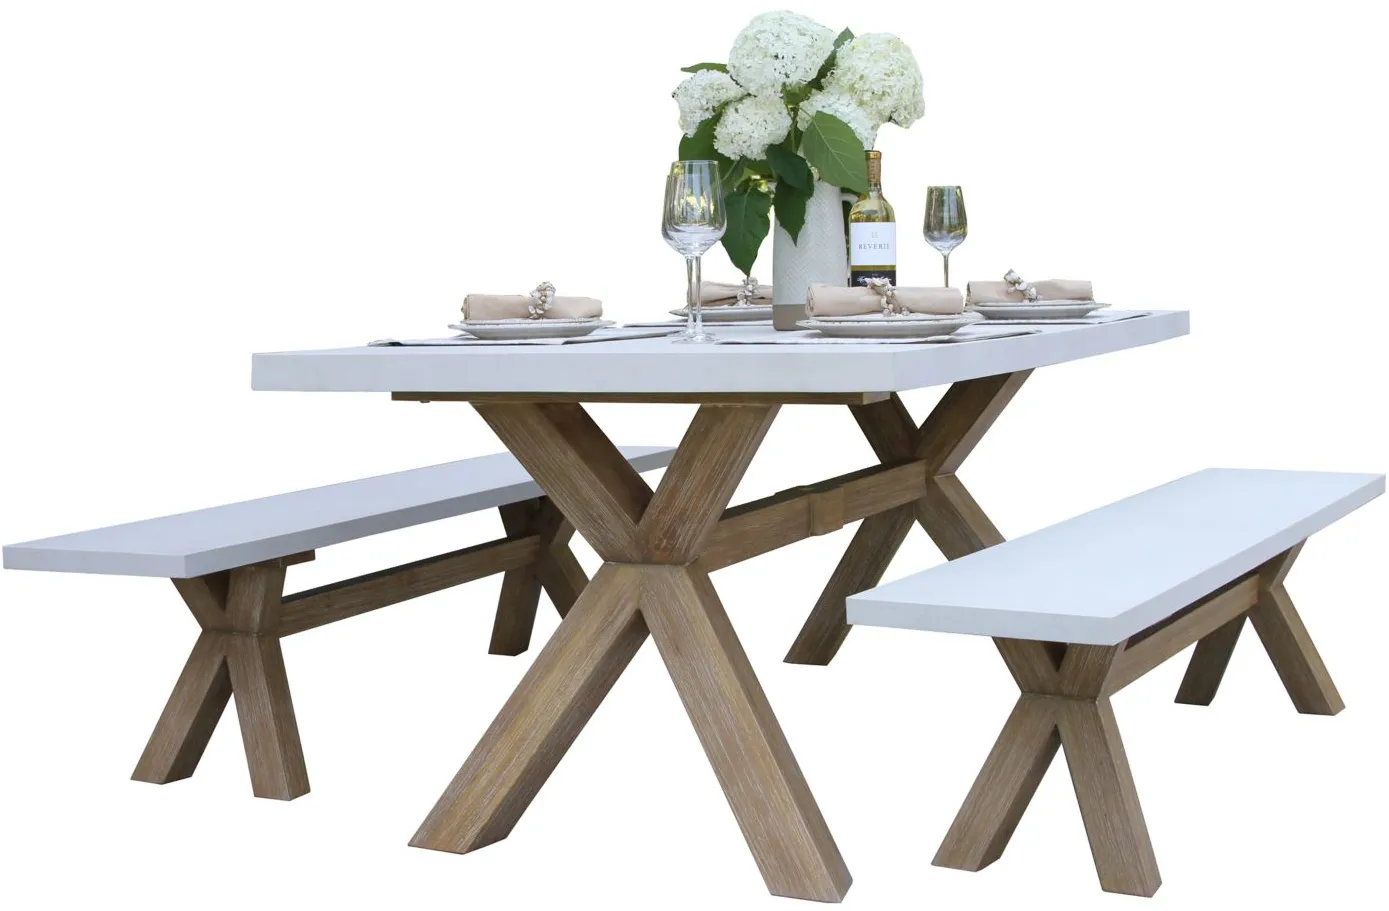 Nautical 3-pc. Eucalyptus Rectangle Outdoor Dining Set w/ Benches in Stone Gray by Outdoor Interiors